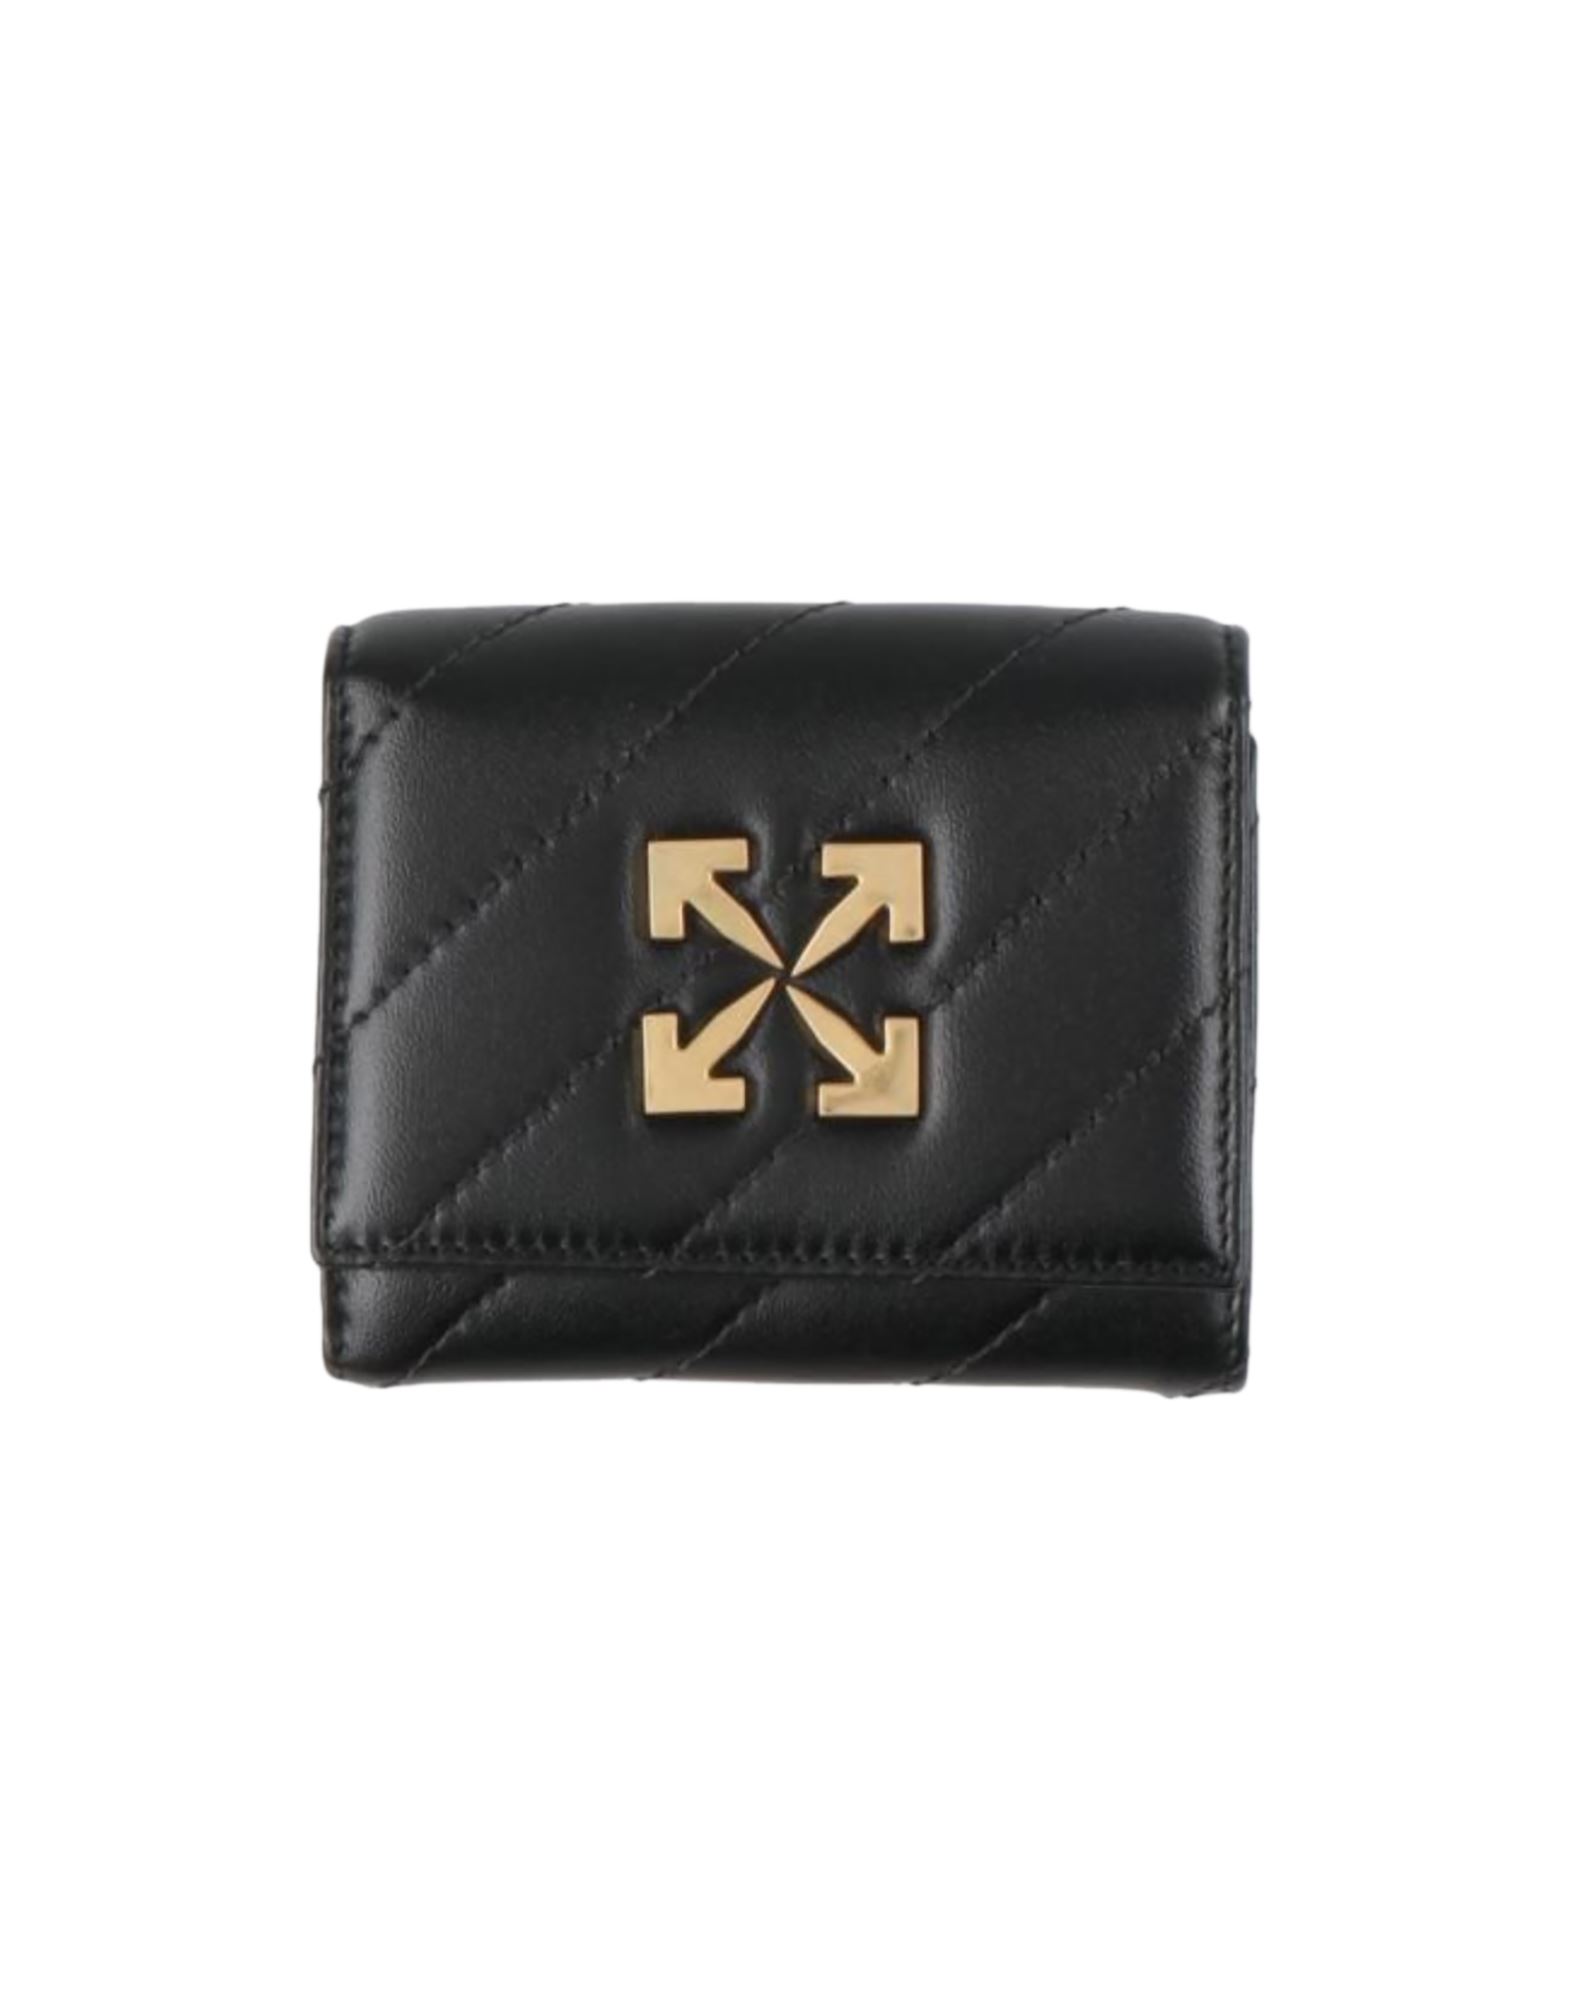 OFF-WHITE OFF-WHITE WOMAN WALLET BLACK SIZE - SOFT LEATHER